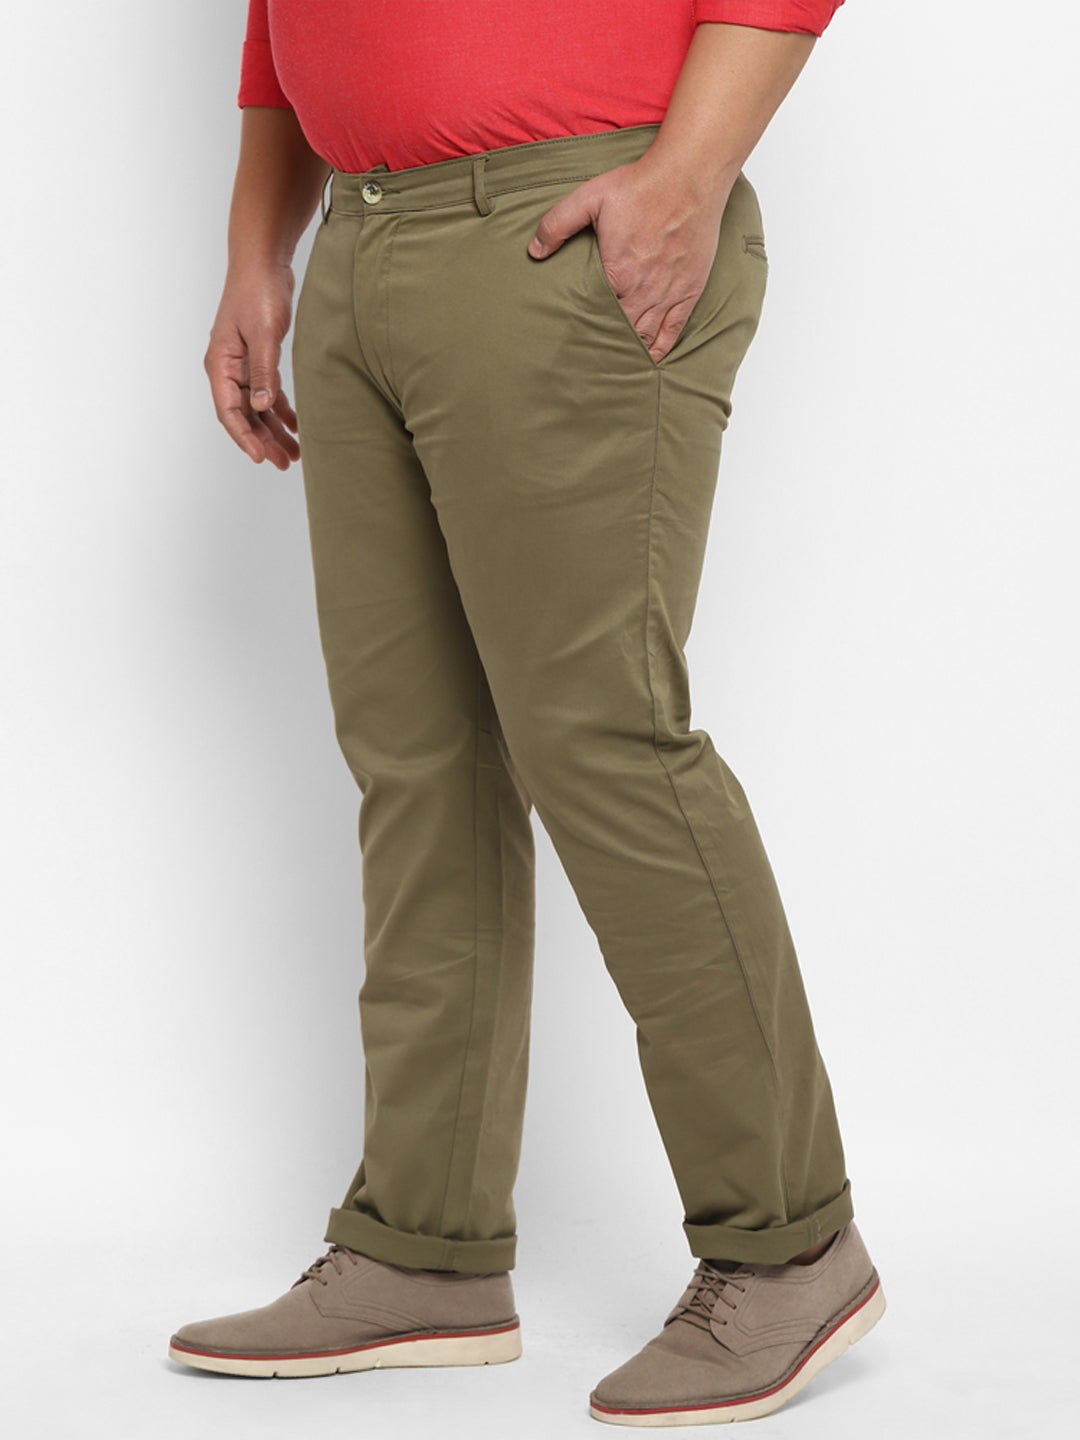 Plus Men's Olive Green Cotton Regular Fit Casual Chinos Trousers Stretch